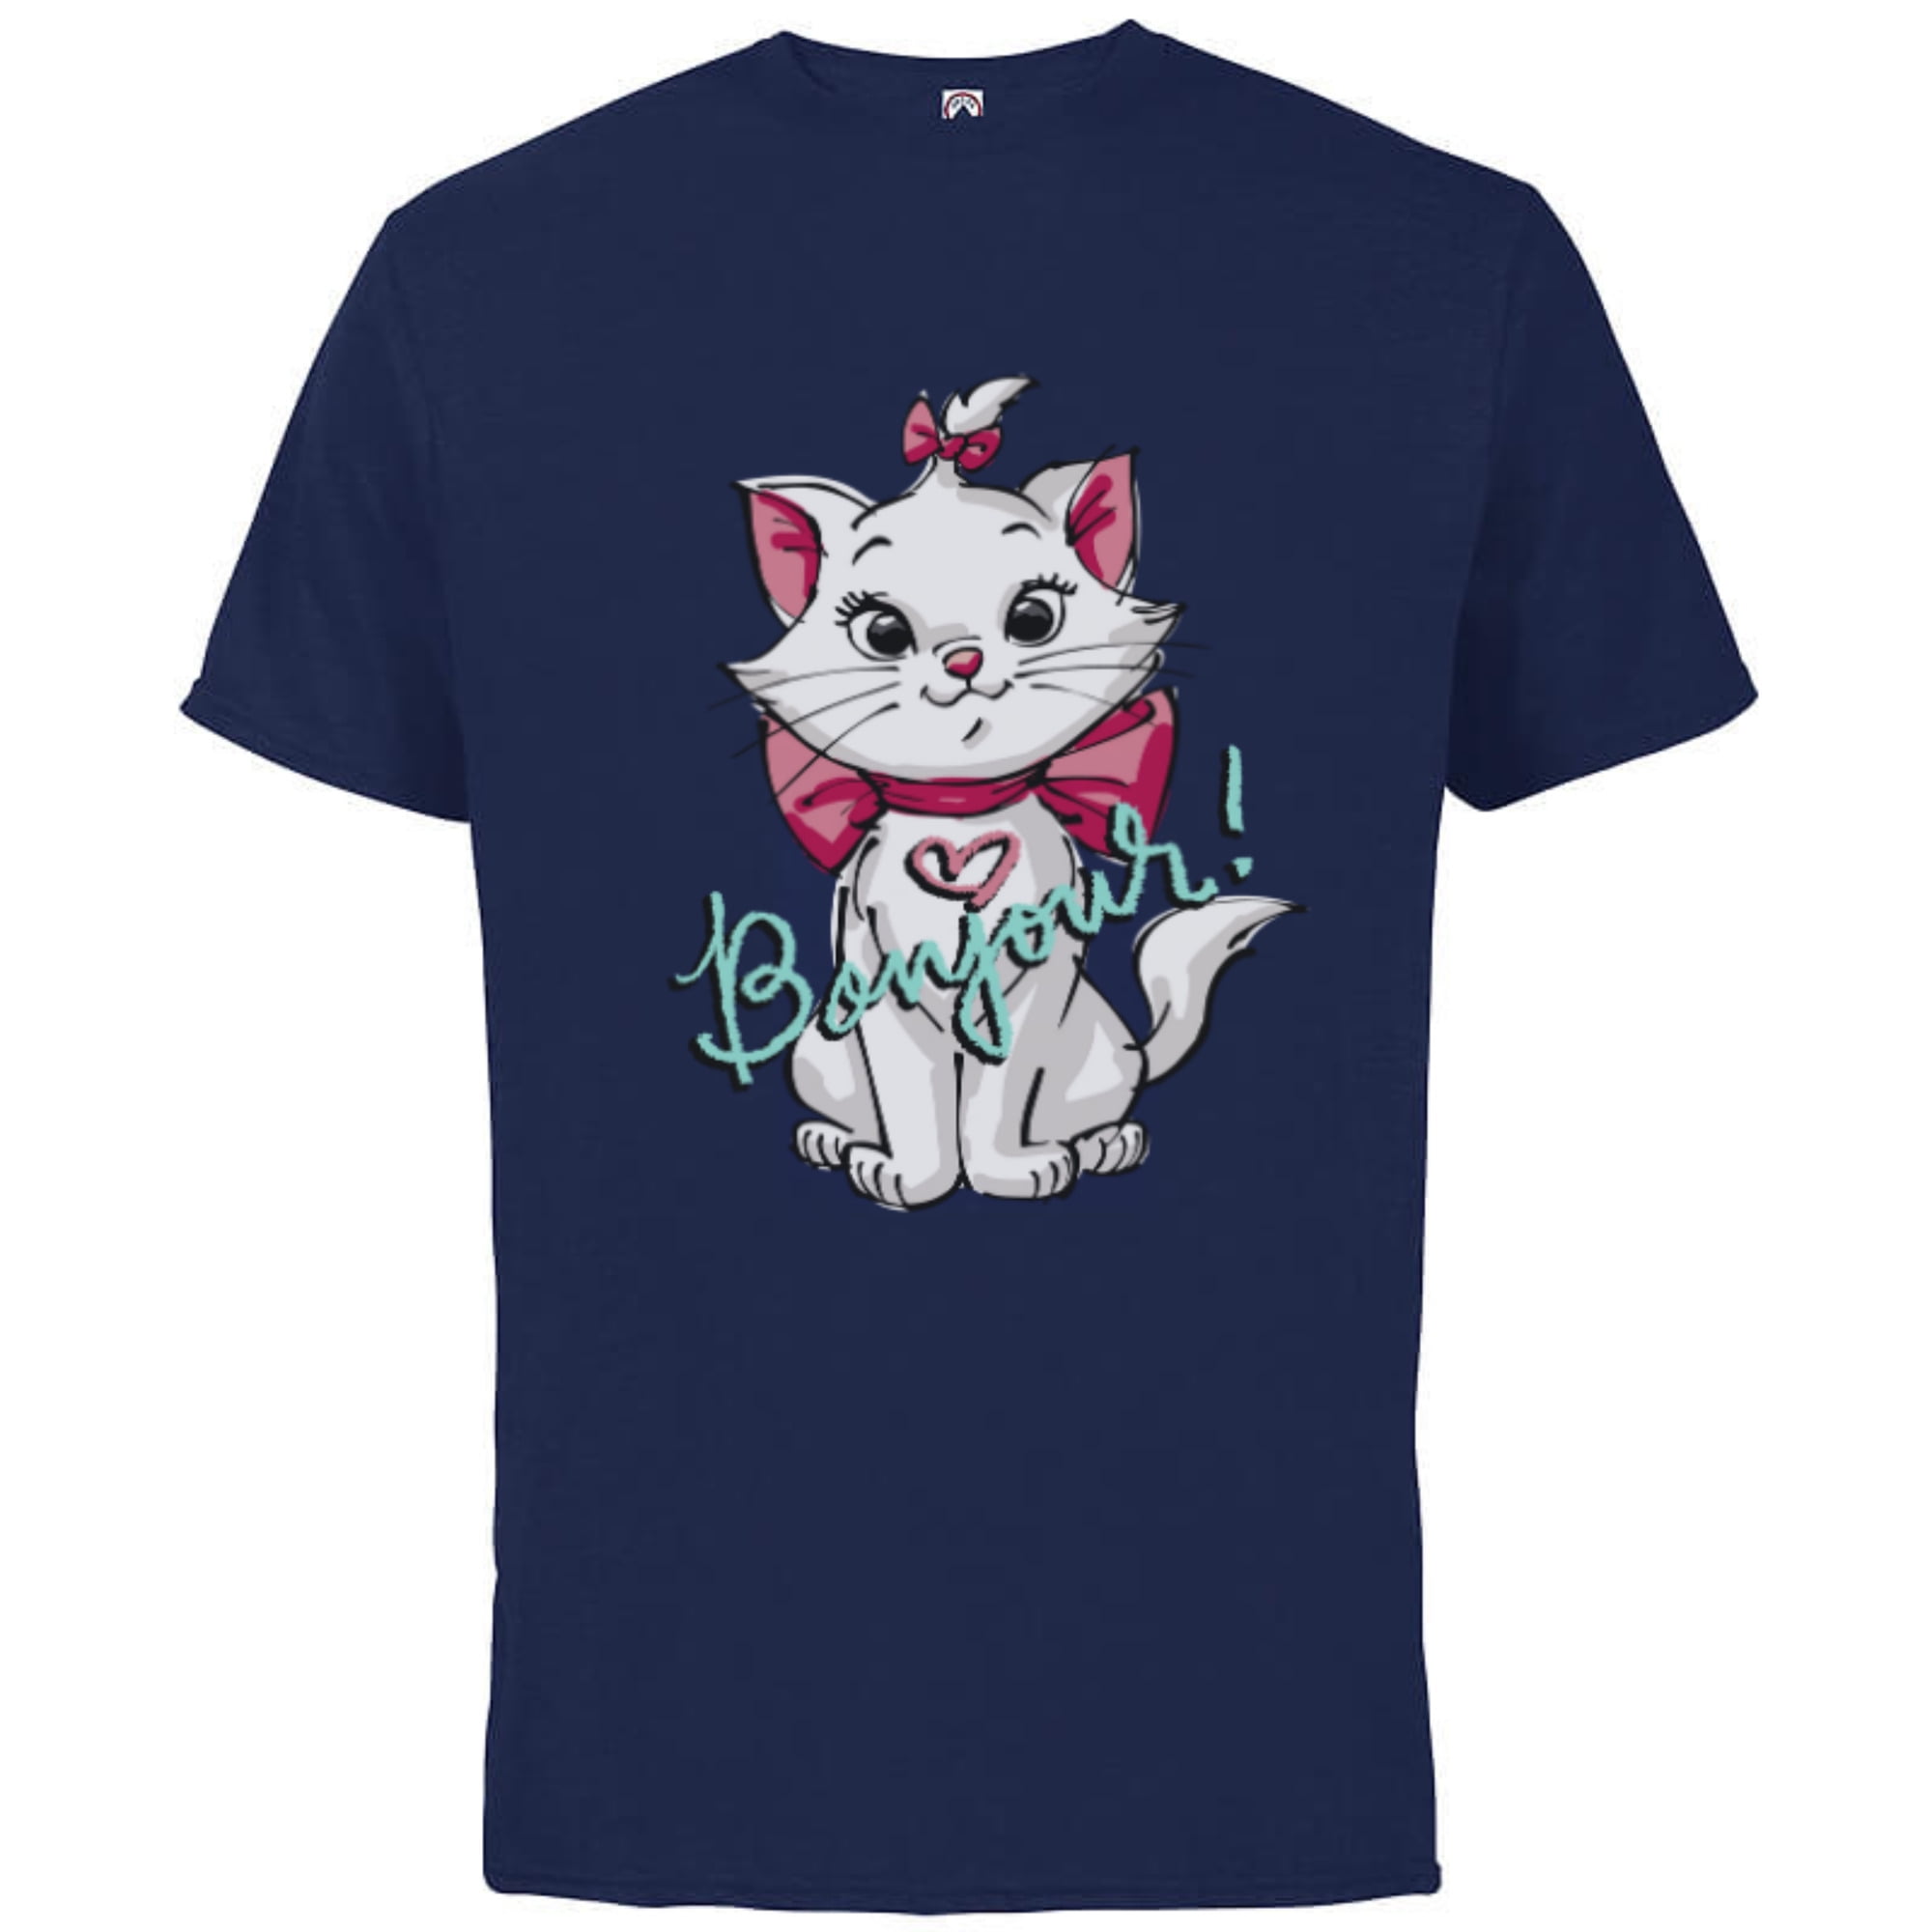 T-Shirt - Cotton Disney Sleeve Bonjour for Marie -Customized-White Short Adults Aristocats